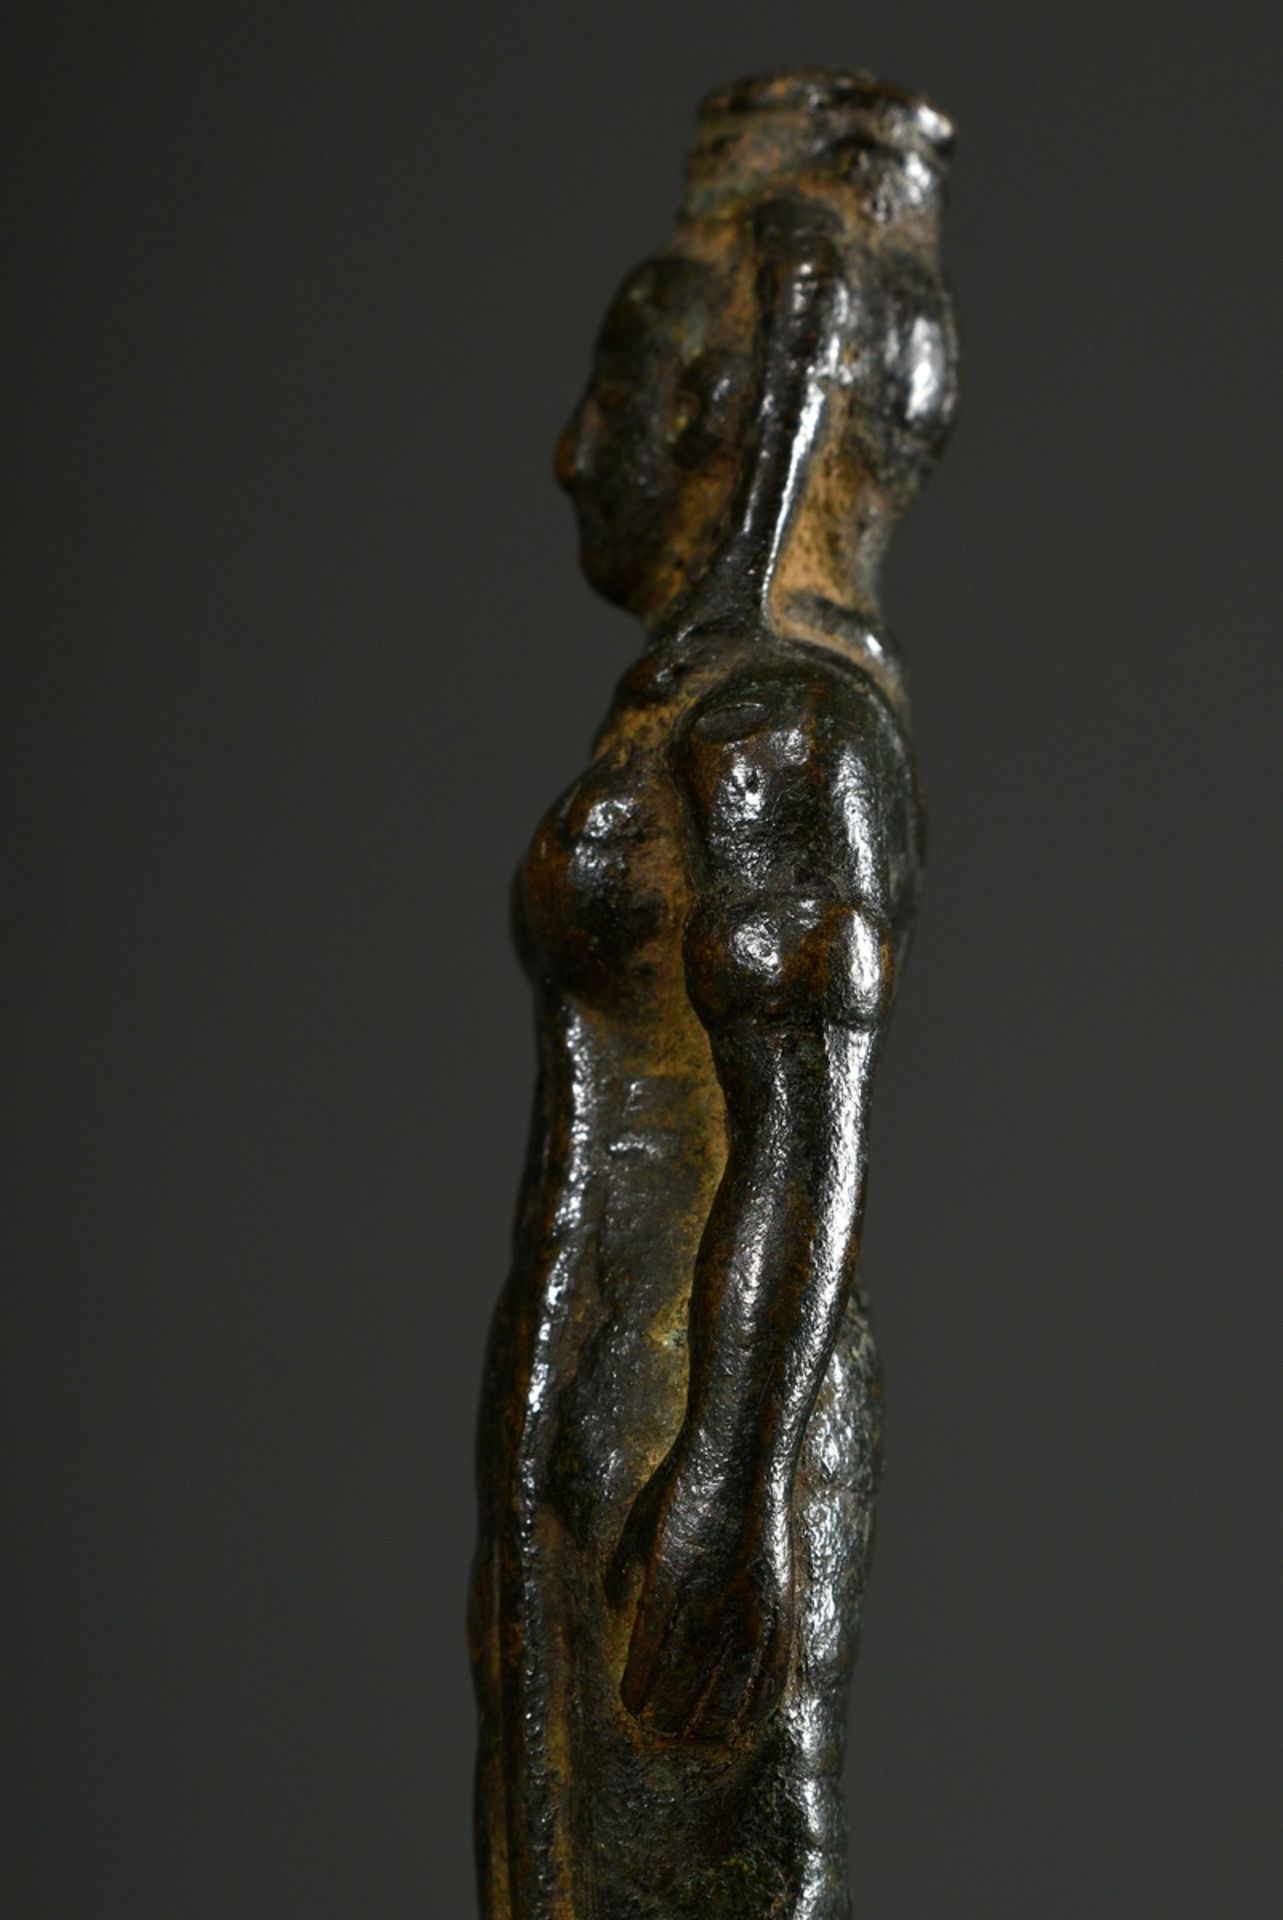 Small statuette "Female Egyptian deity", bronze with greenish patina, mounted/glued on marble base, - Image 6 of 6